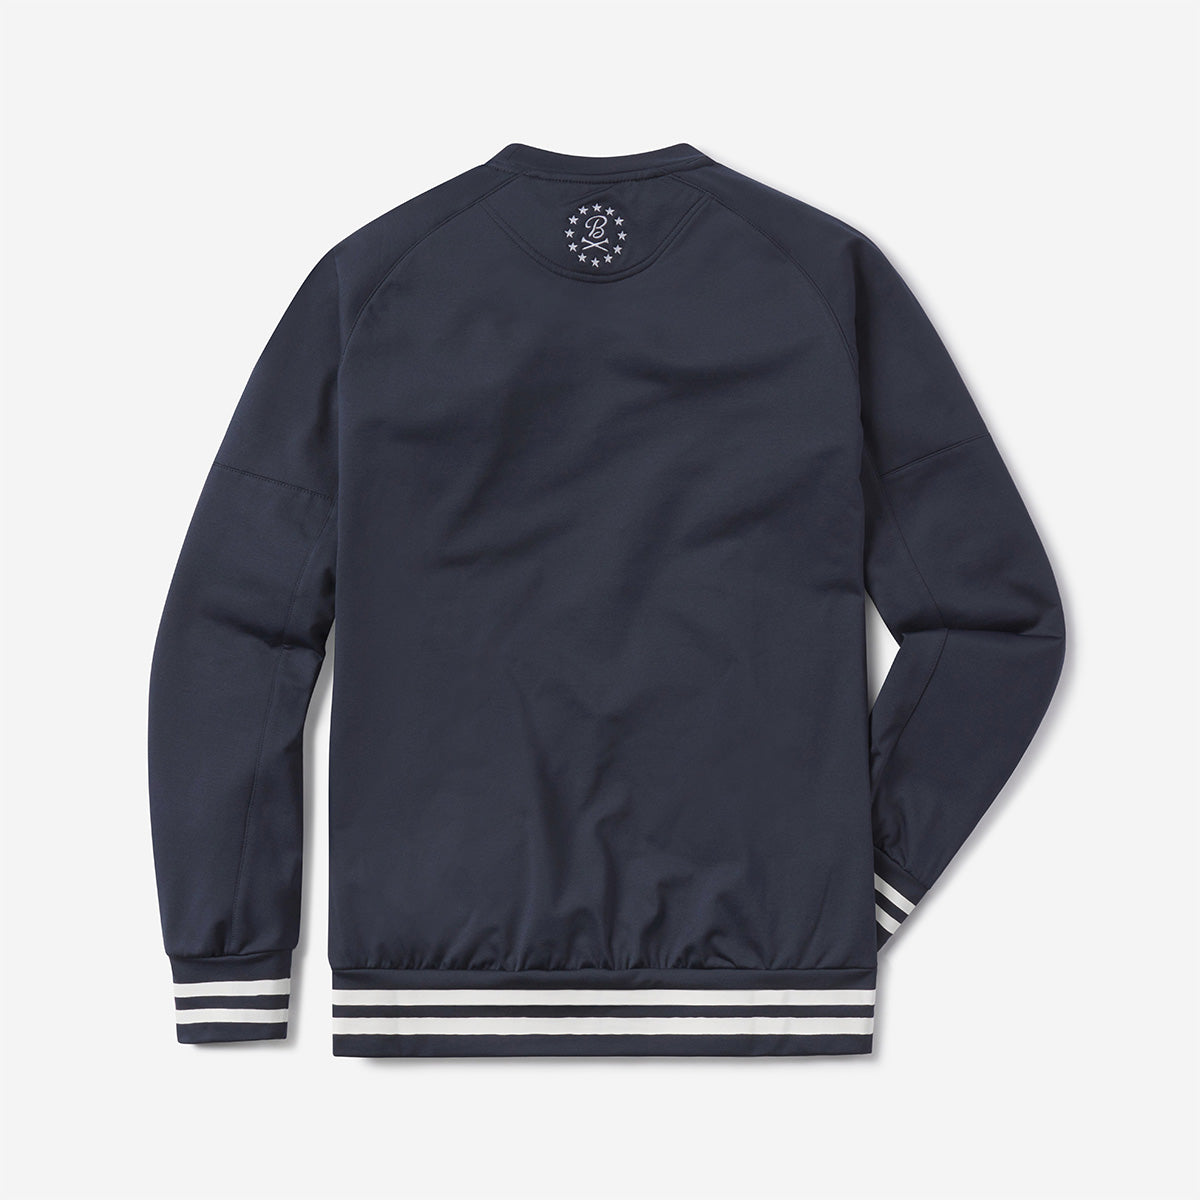 UNRL x Barstool Ryder Cup Trophy Crossover Crewneck-Crewnecks-Fore Play-Barstool Sports